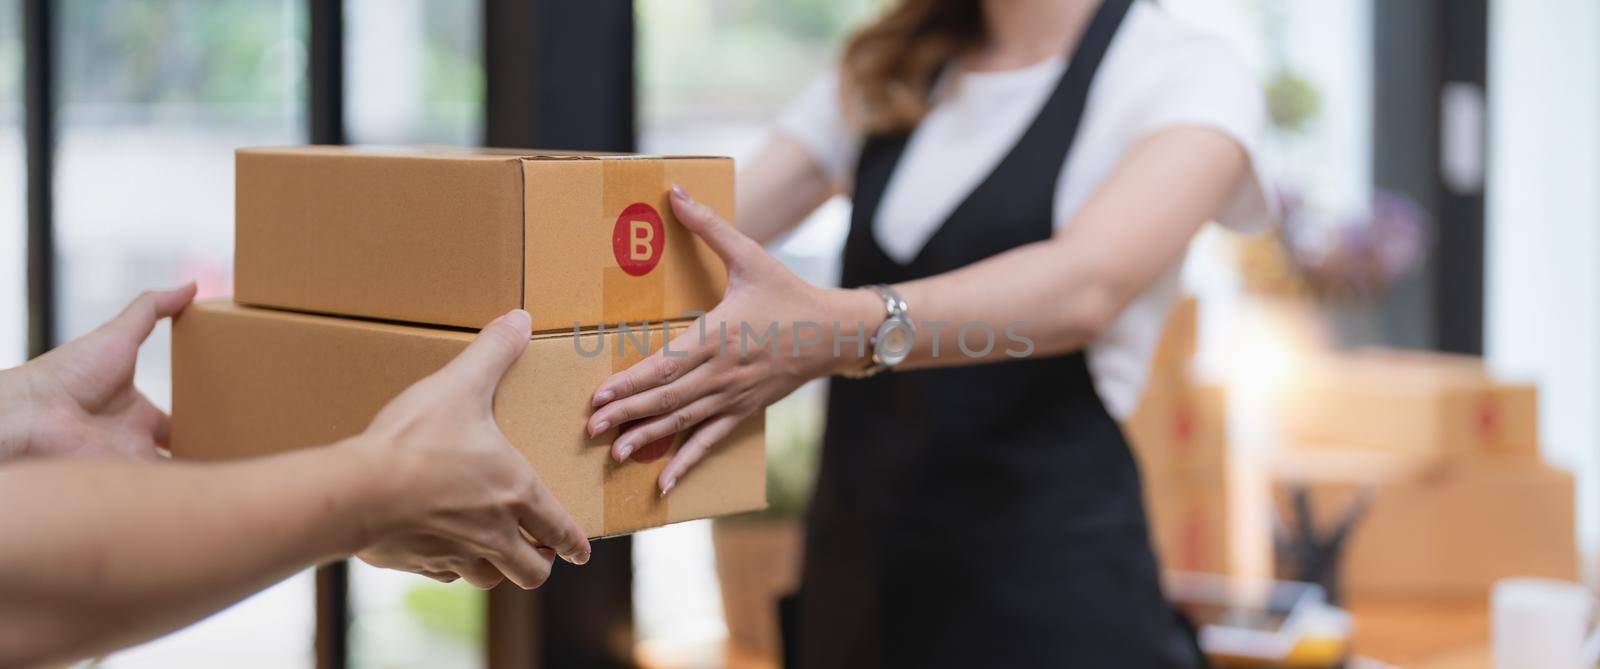 customer receiving a cardboard boxes parcel from delivery man in the morning, delivery service concept